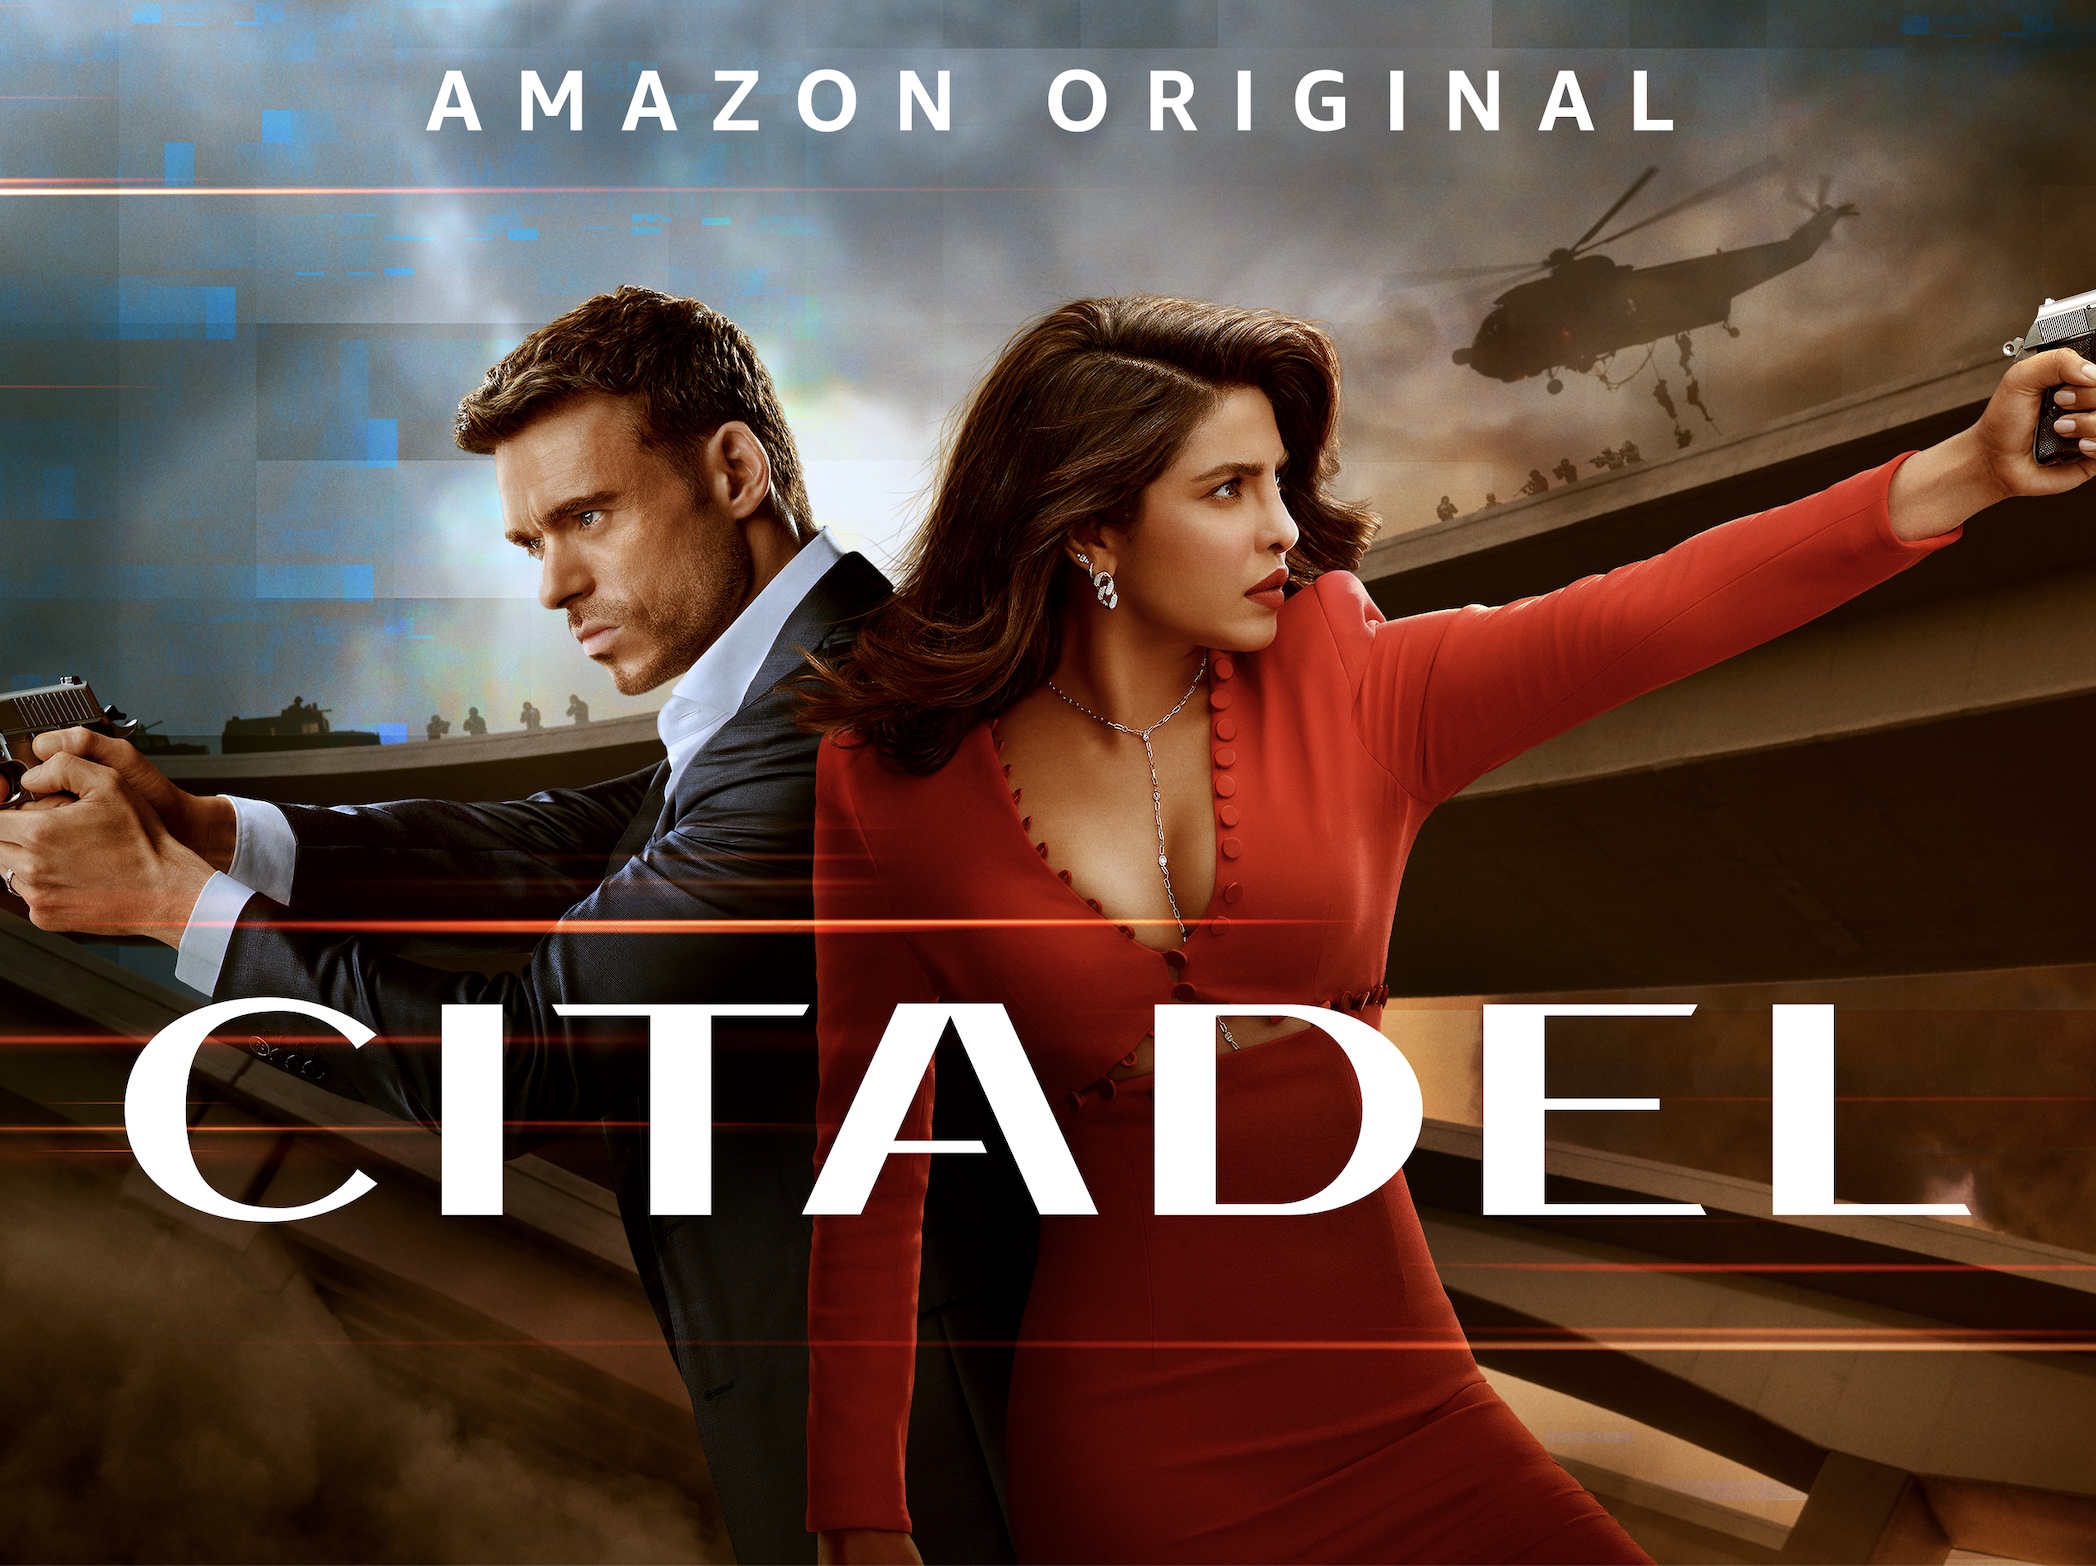 Citadel Cast - Every Actor and Character in the Amazon Series